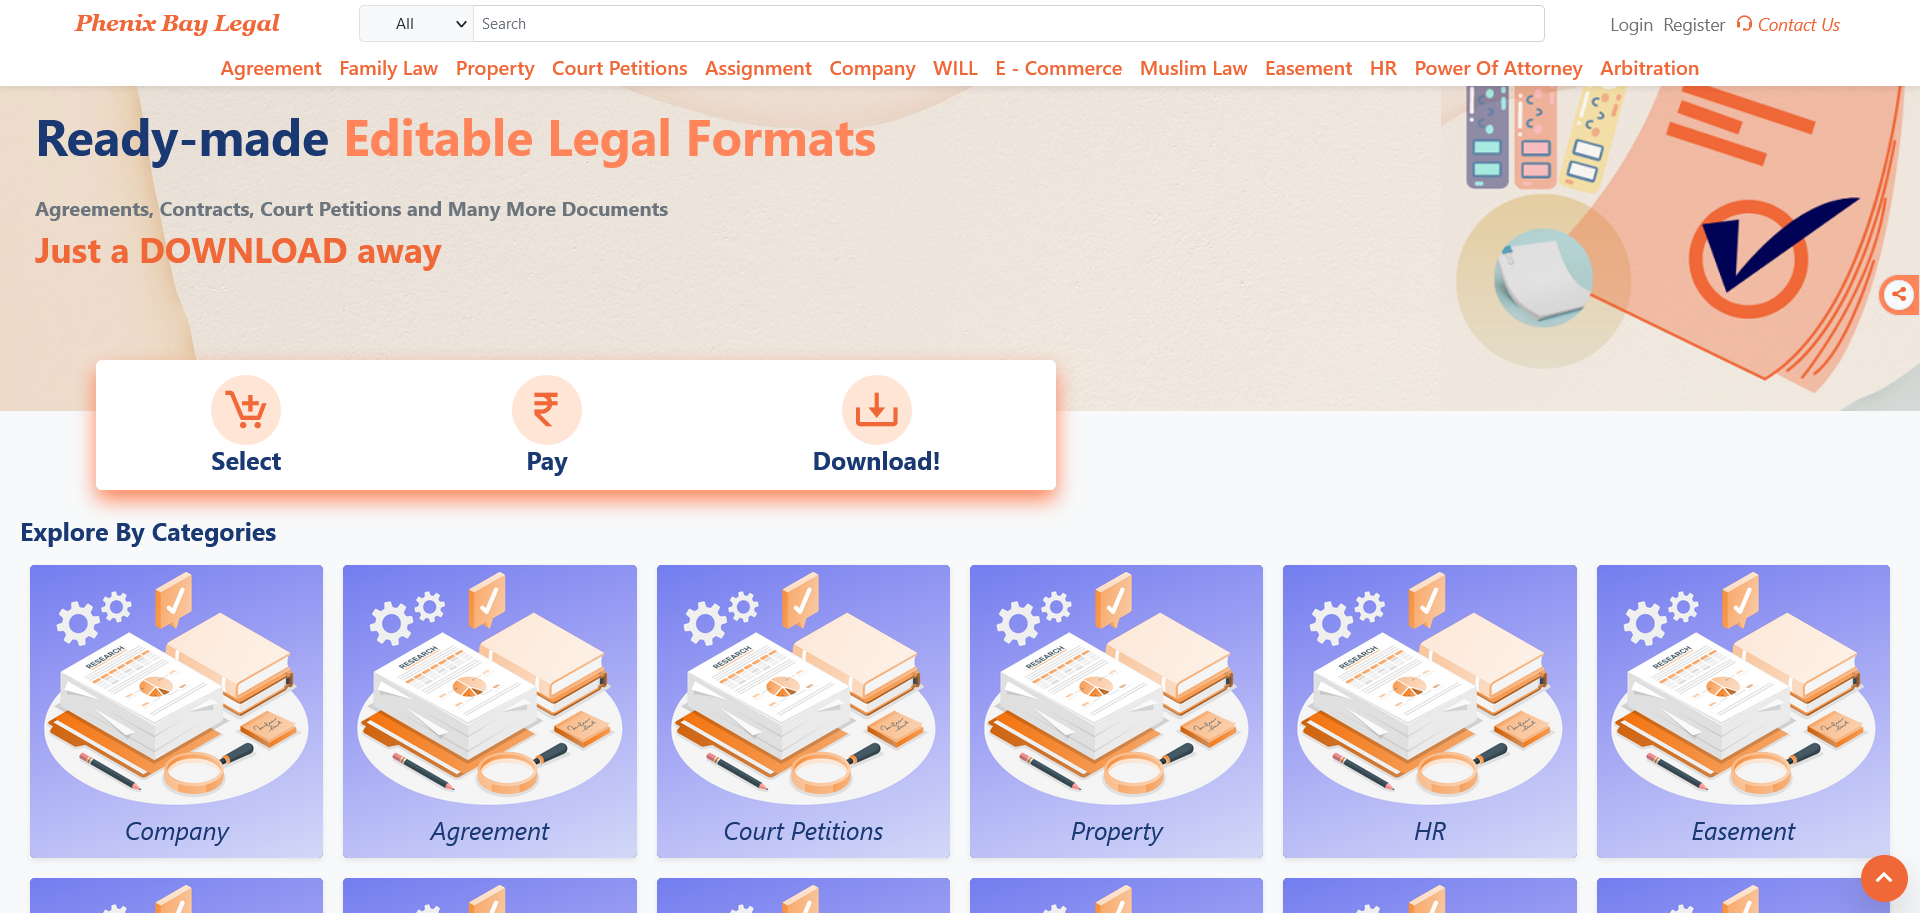 What are the benefits of using a Phenix Bay Legal - Ready-made Legal Formats - Image